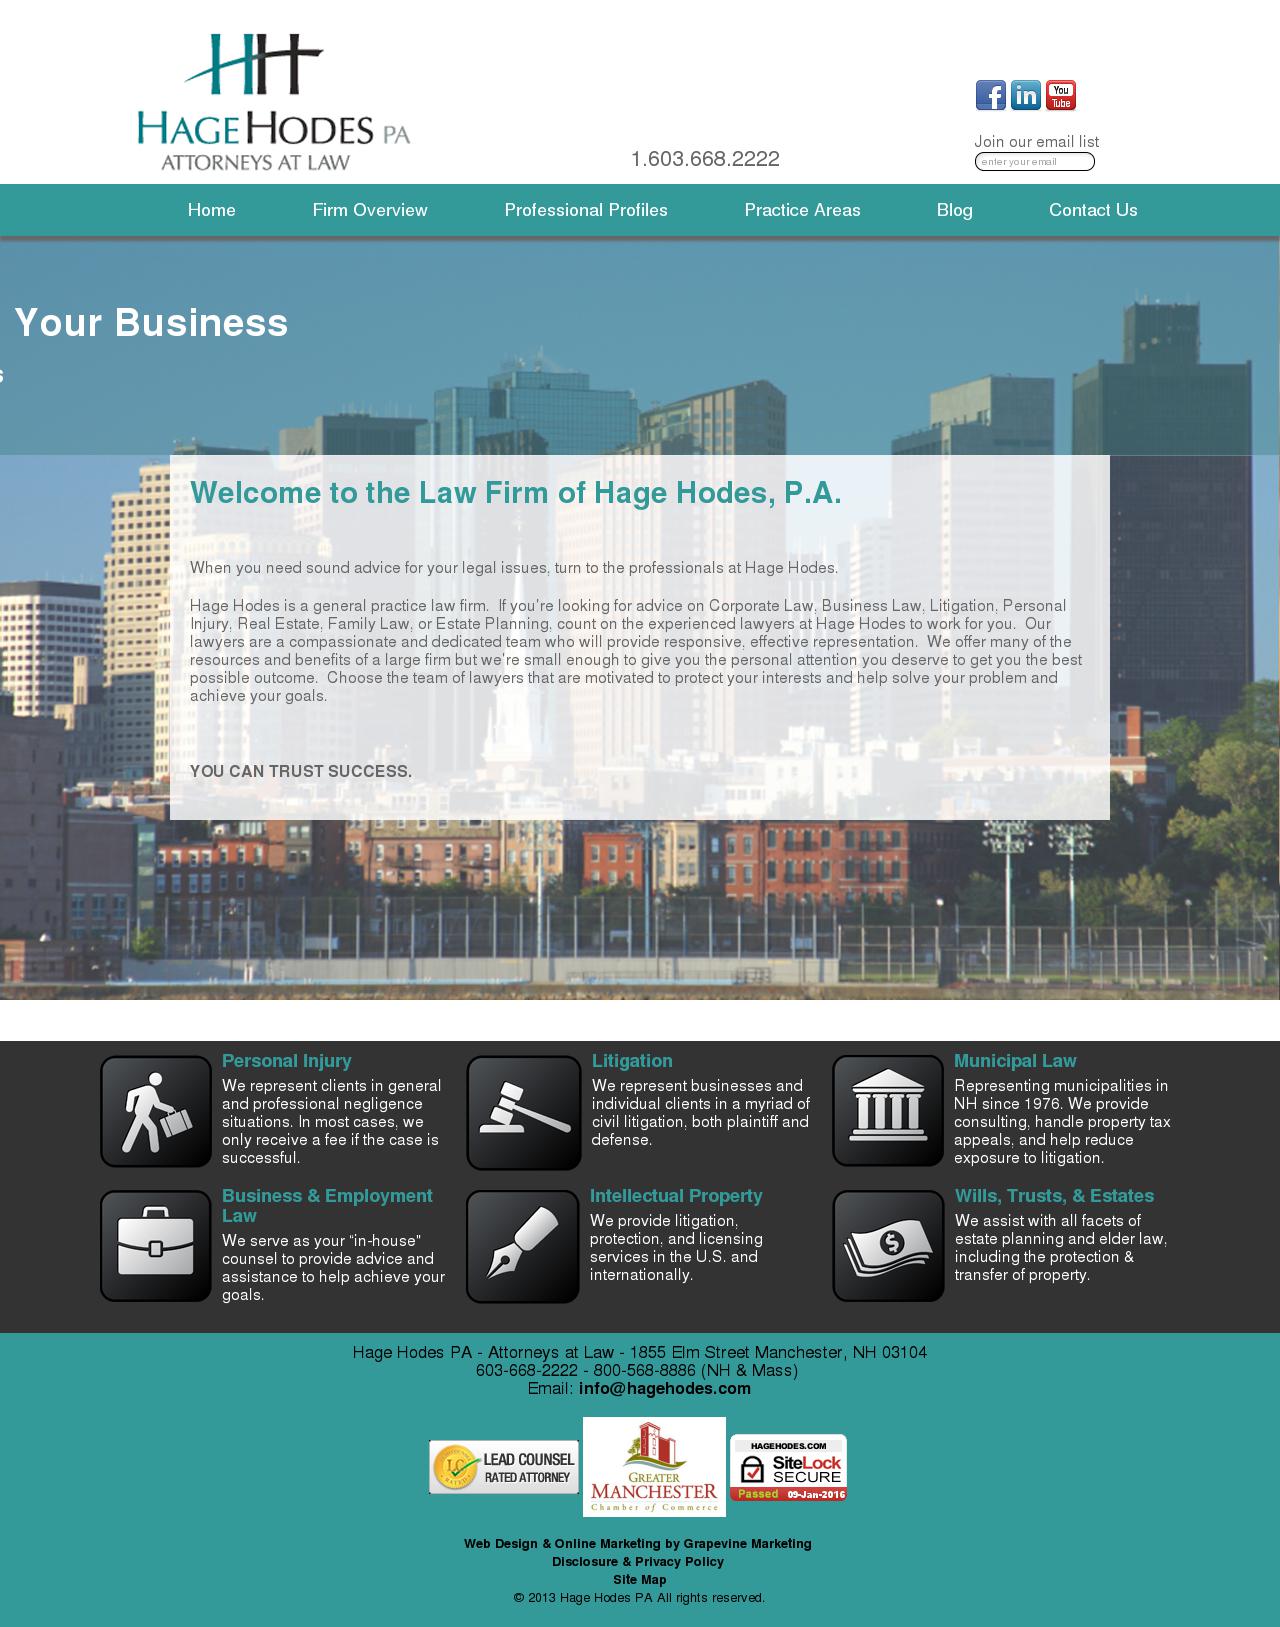 Hage Hodes PA - Manchester NH Lawyers